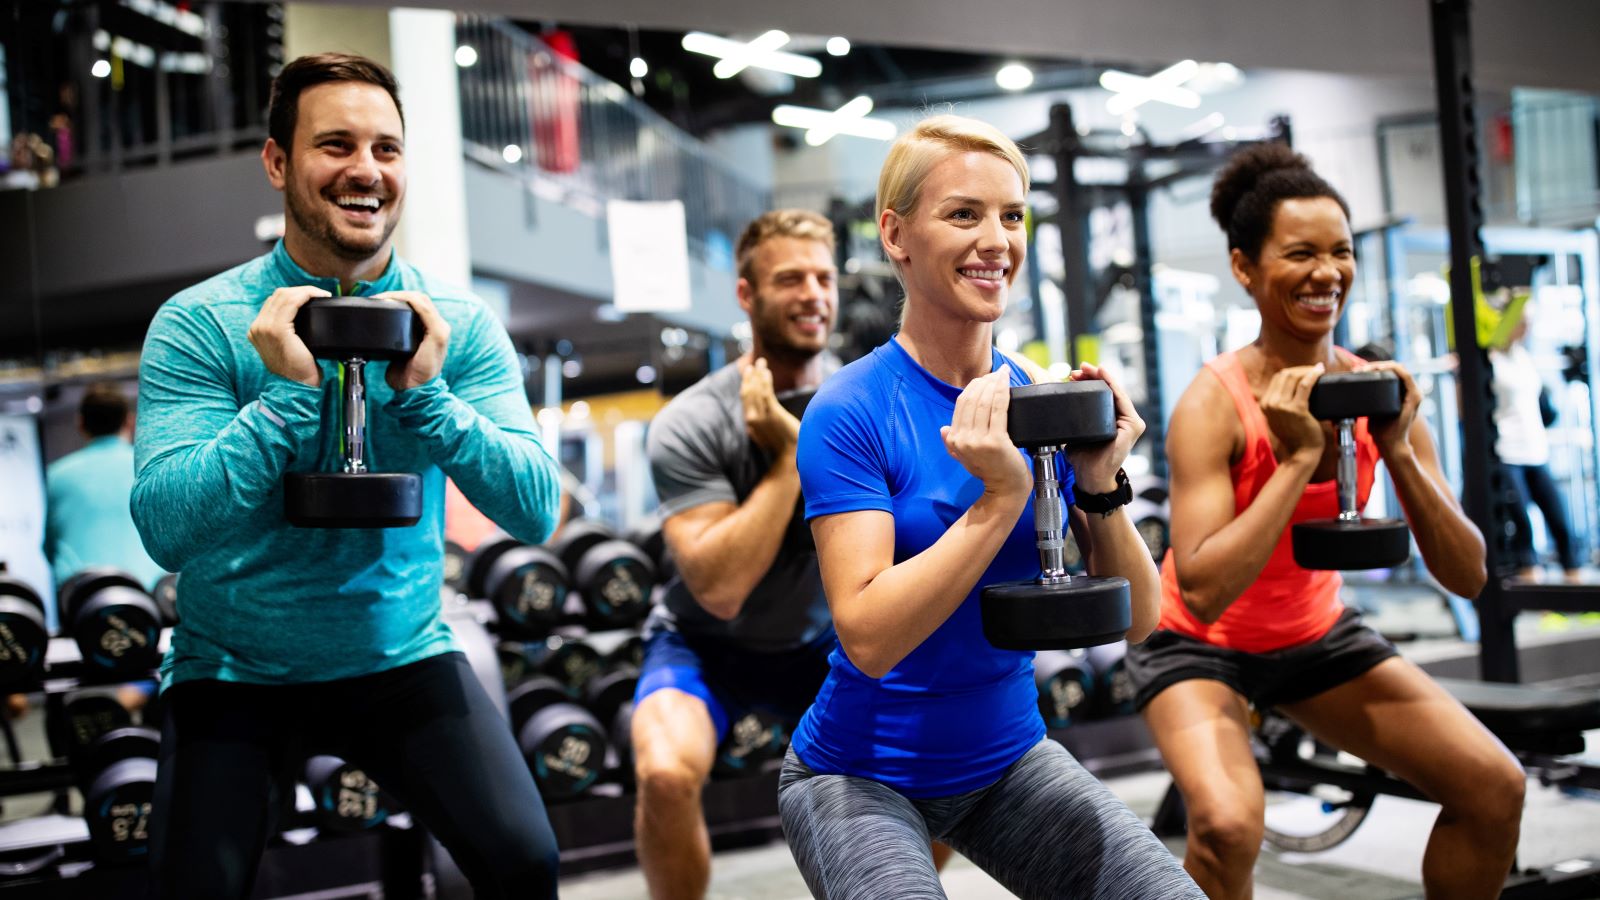 Why You Should Add Strength Training to Your Exercise Routine